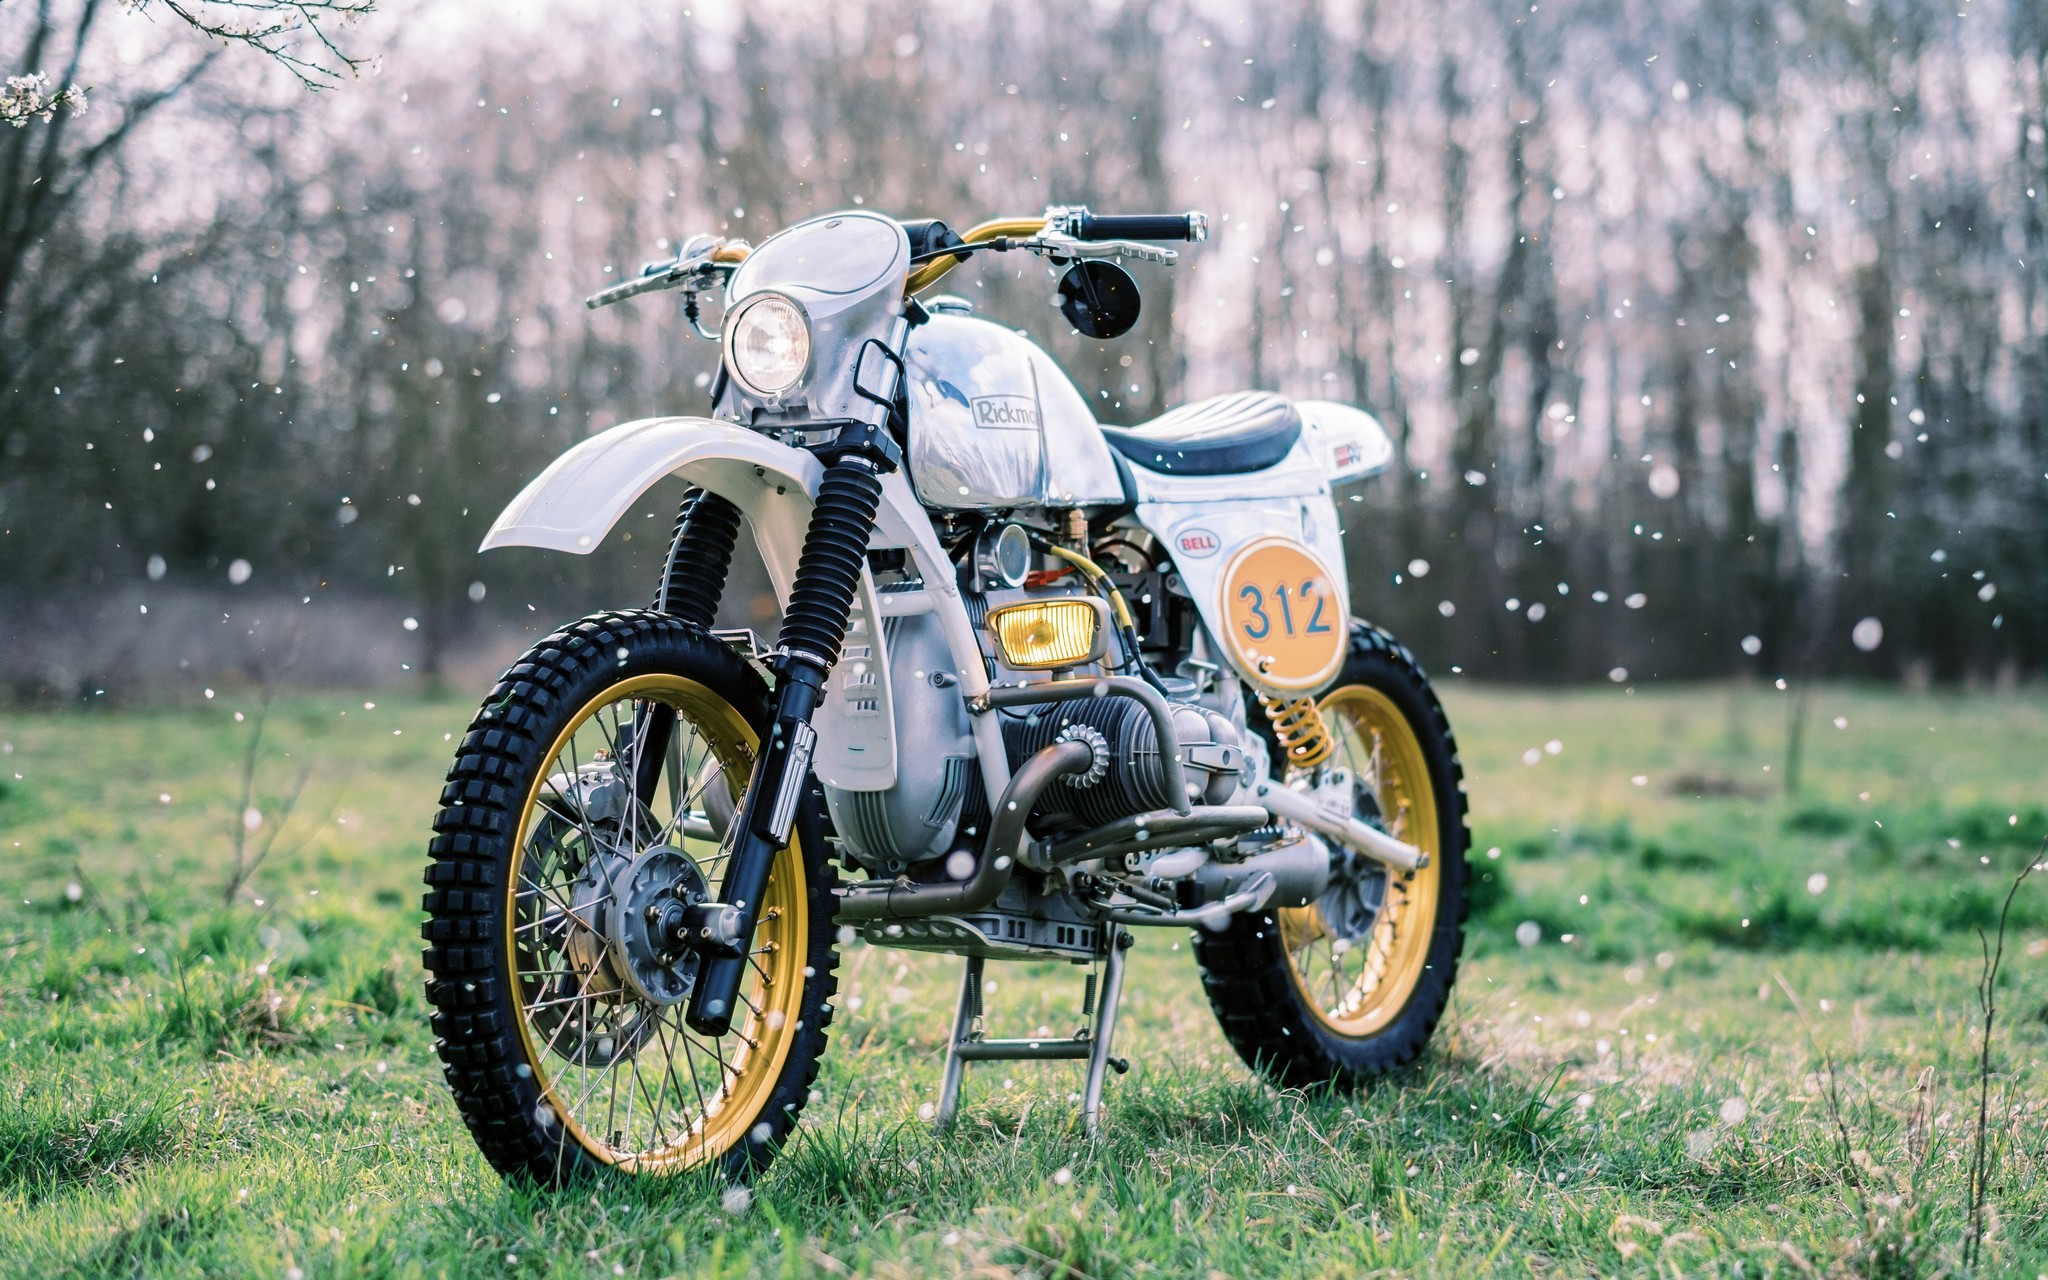 BMW Enduro custom motorcycle in a grassy field with flower petals falling